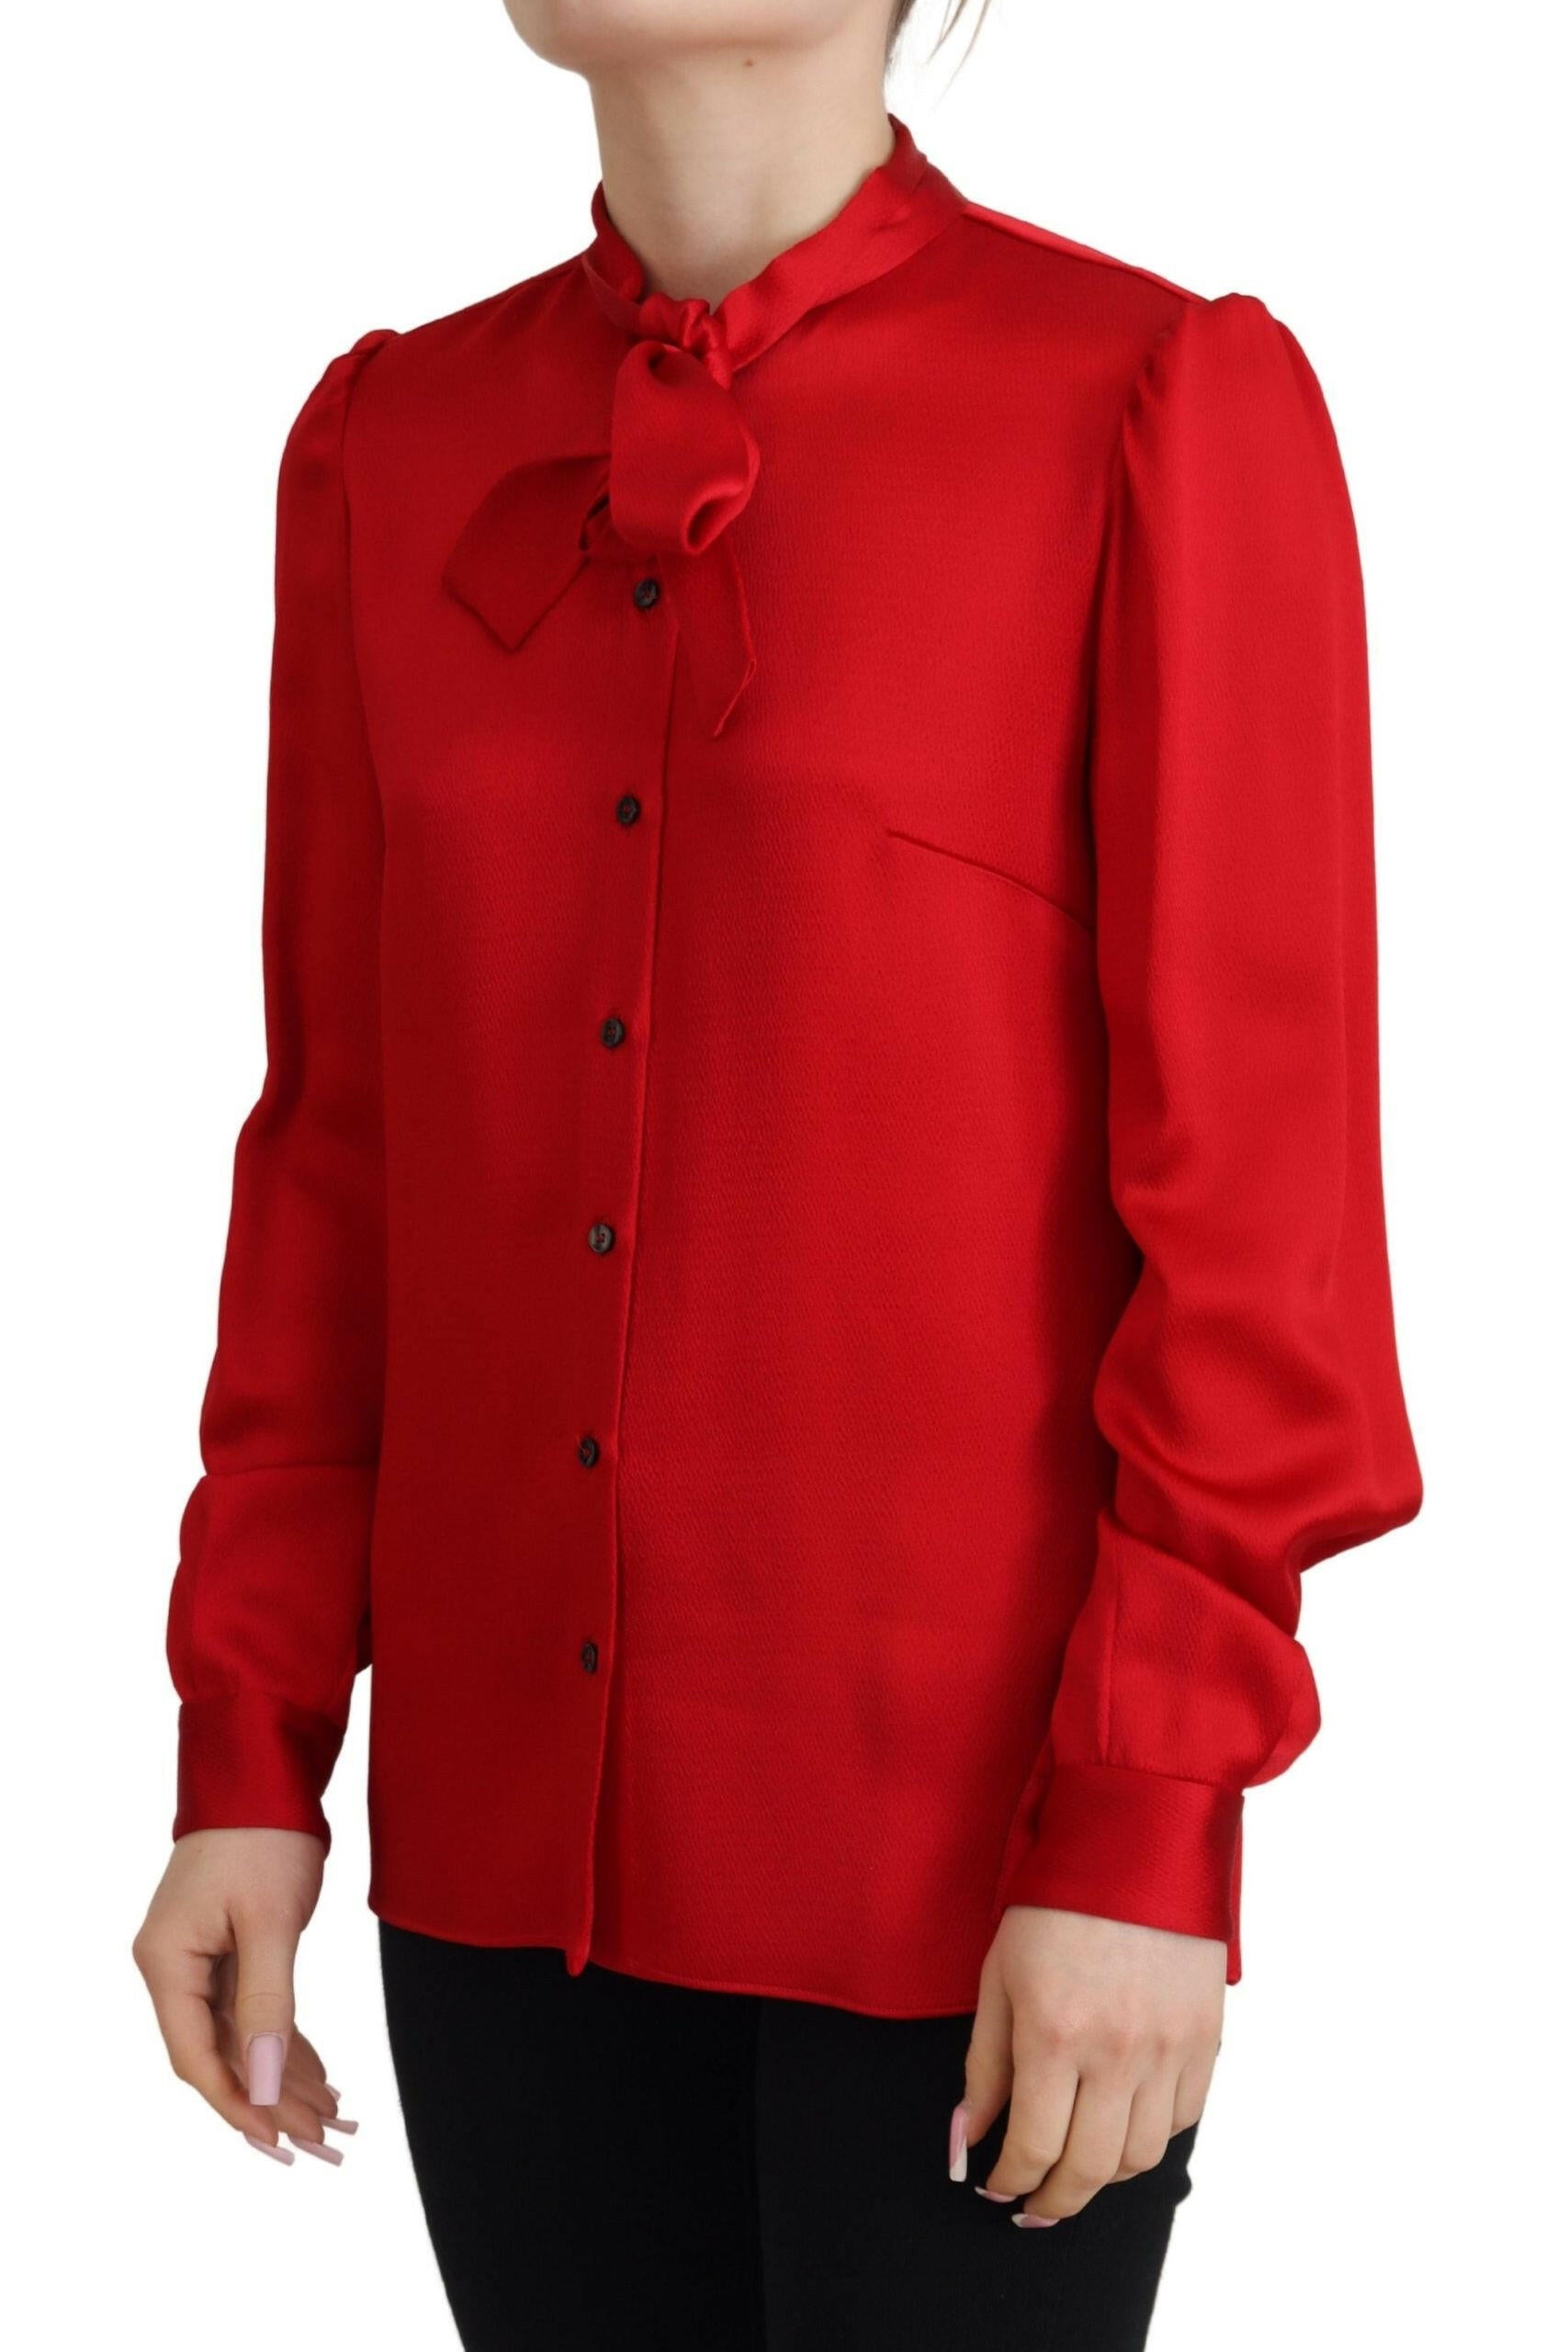 Dolce & Gabbana Red Ascot Collar Long Sleeves Blouse Top - GENUINE AUTHENTIC BRAND LLC  